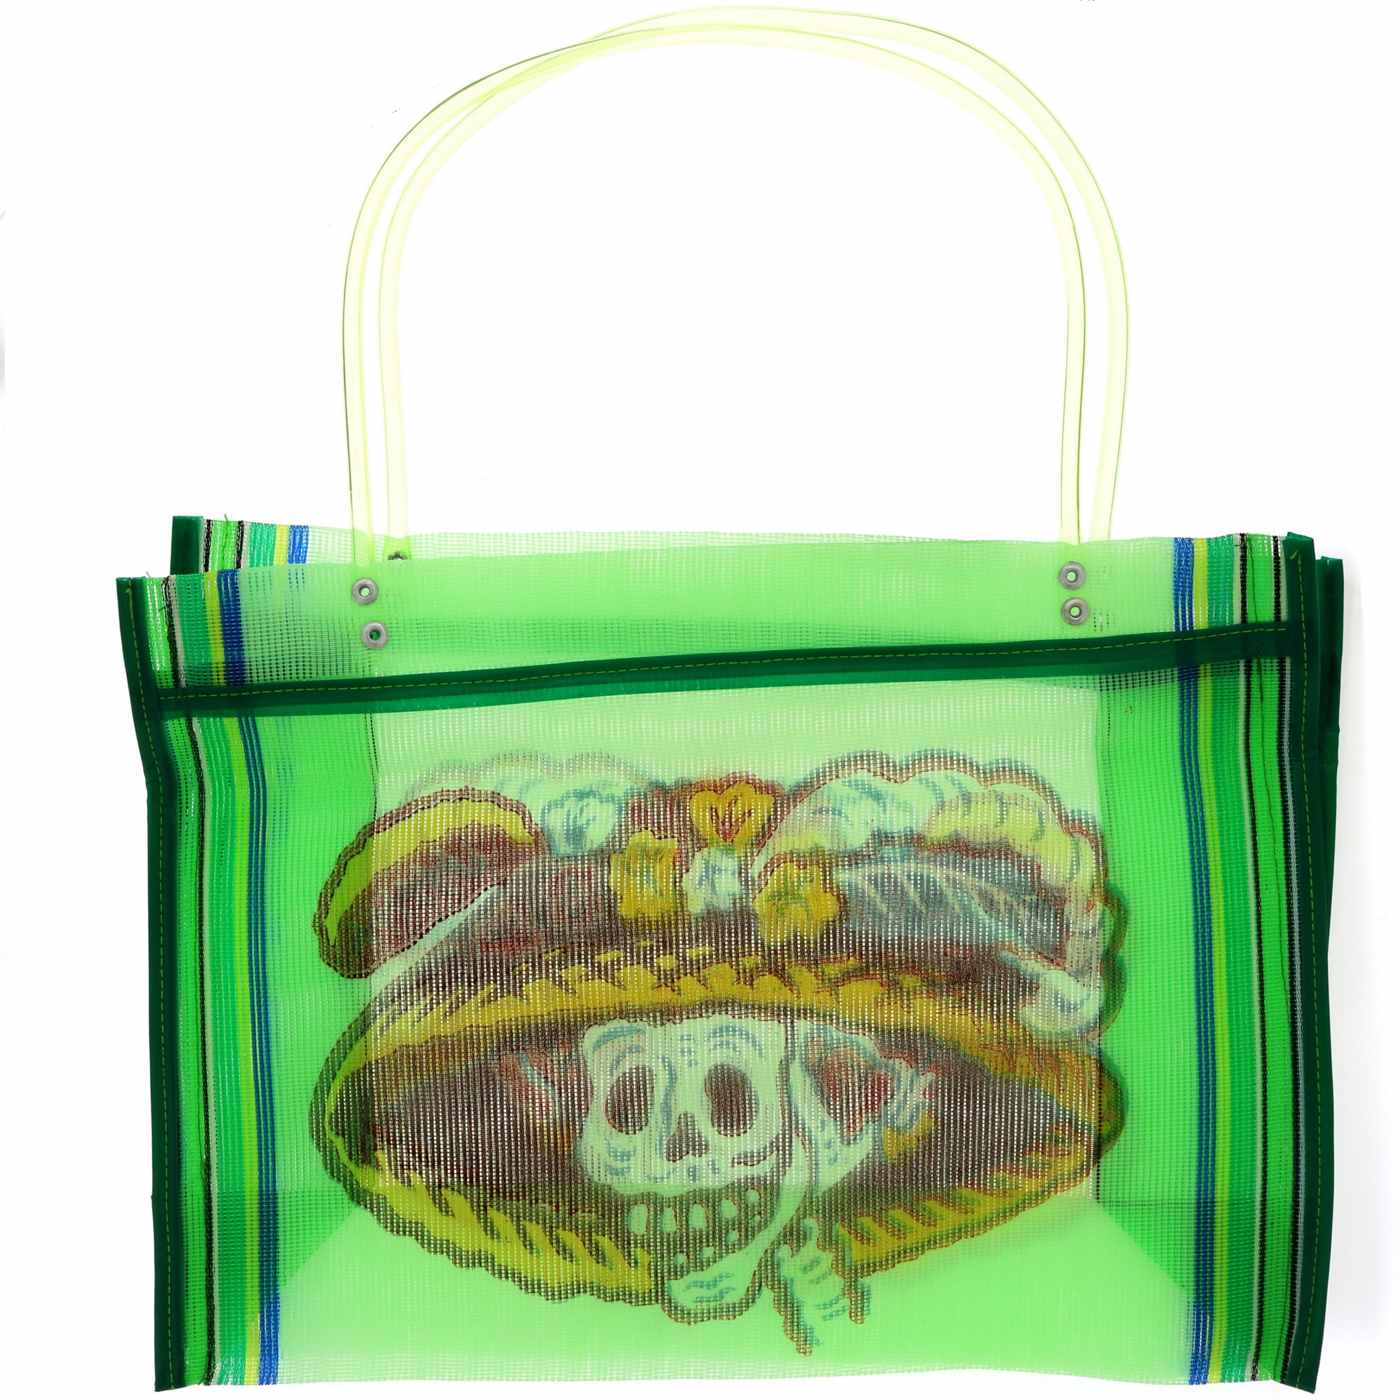 Blue Orange Pottery Day Of The Dead La Catrina Small Mesh Bag, Assorted Colors; image 1 of 6